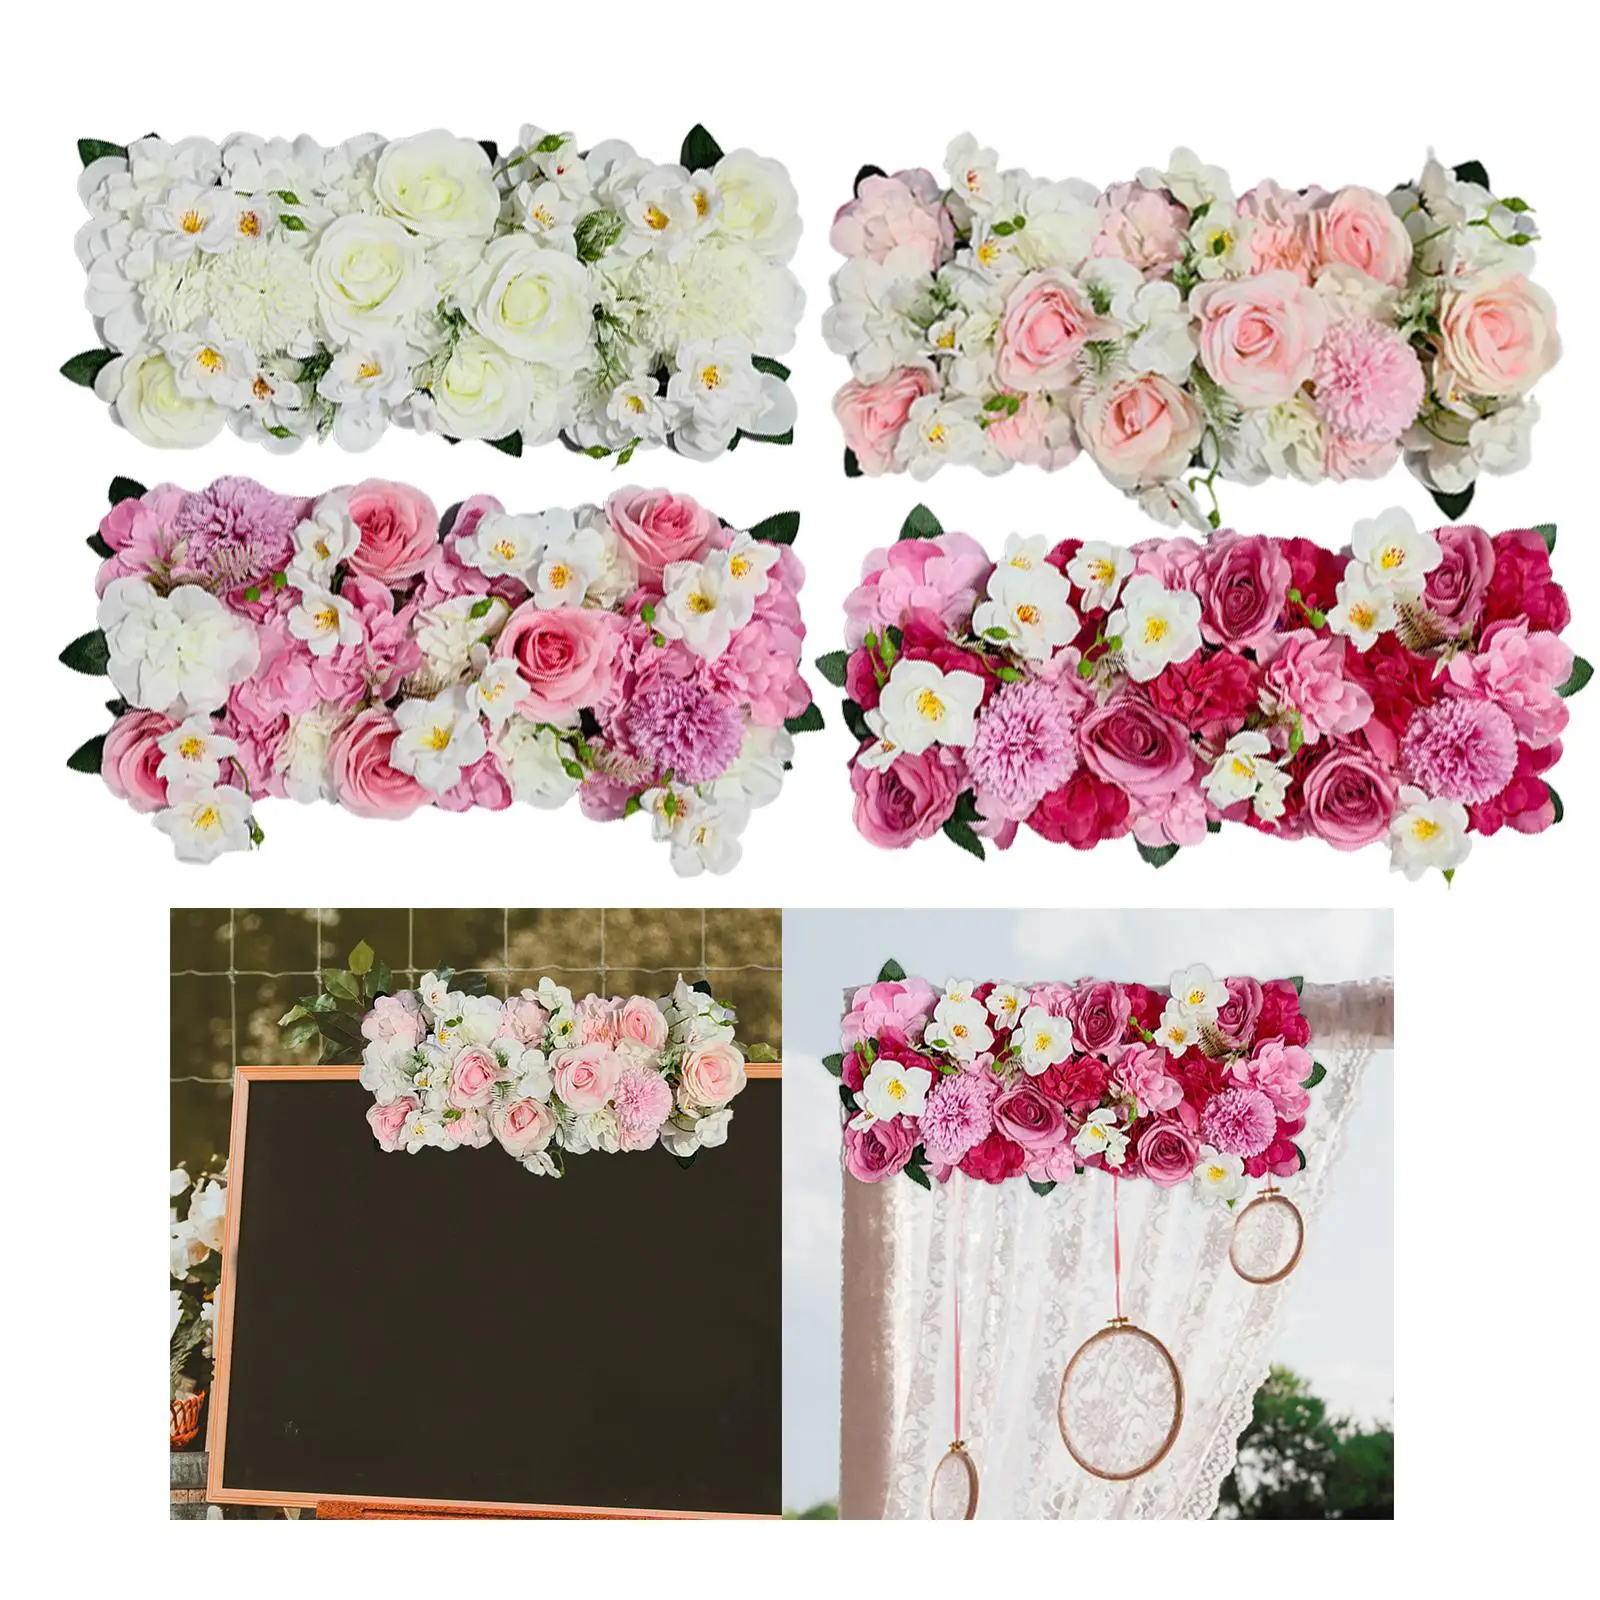 DIY Arch Flower Row Flowers Panel Floral Backdrop Decor Wedding Road Cited Flowers for Event Window Party Public Area Art Hall